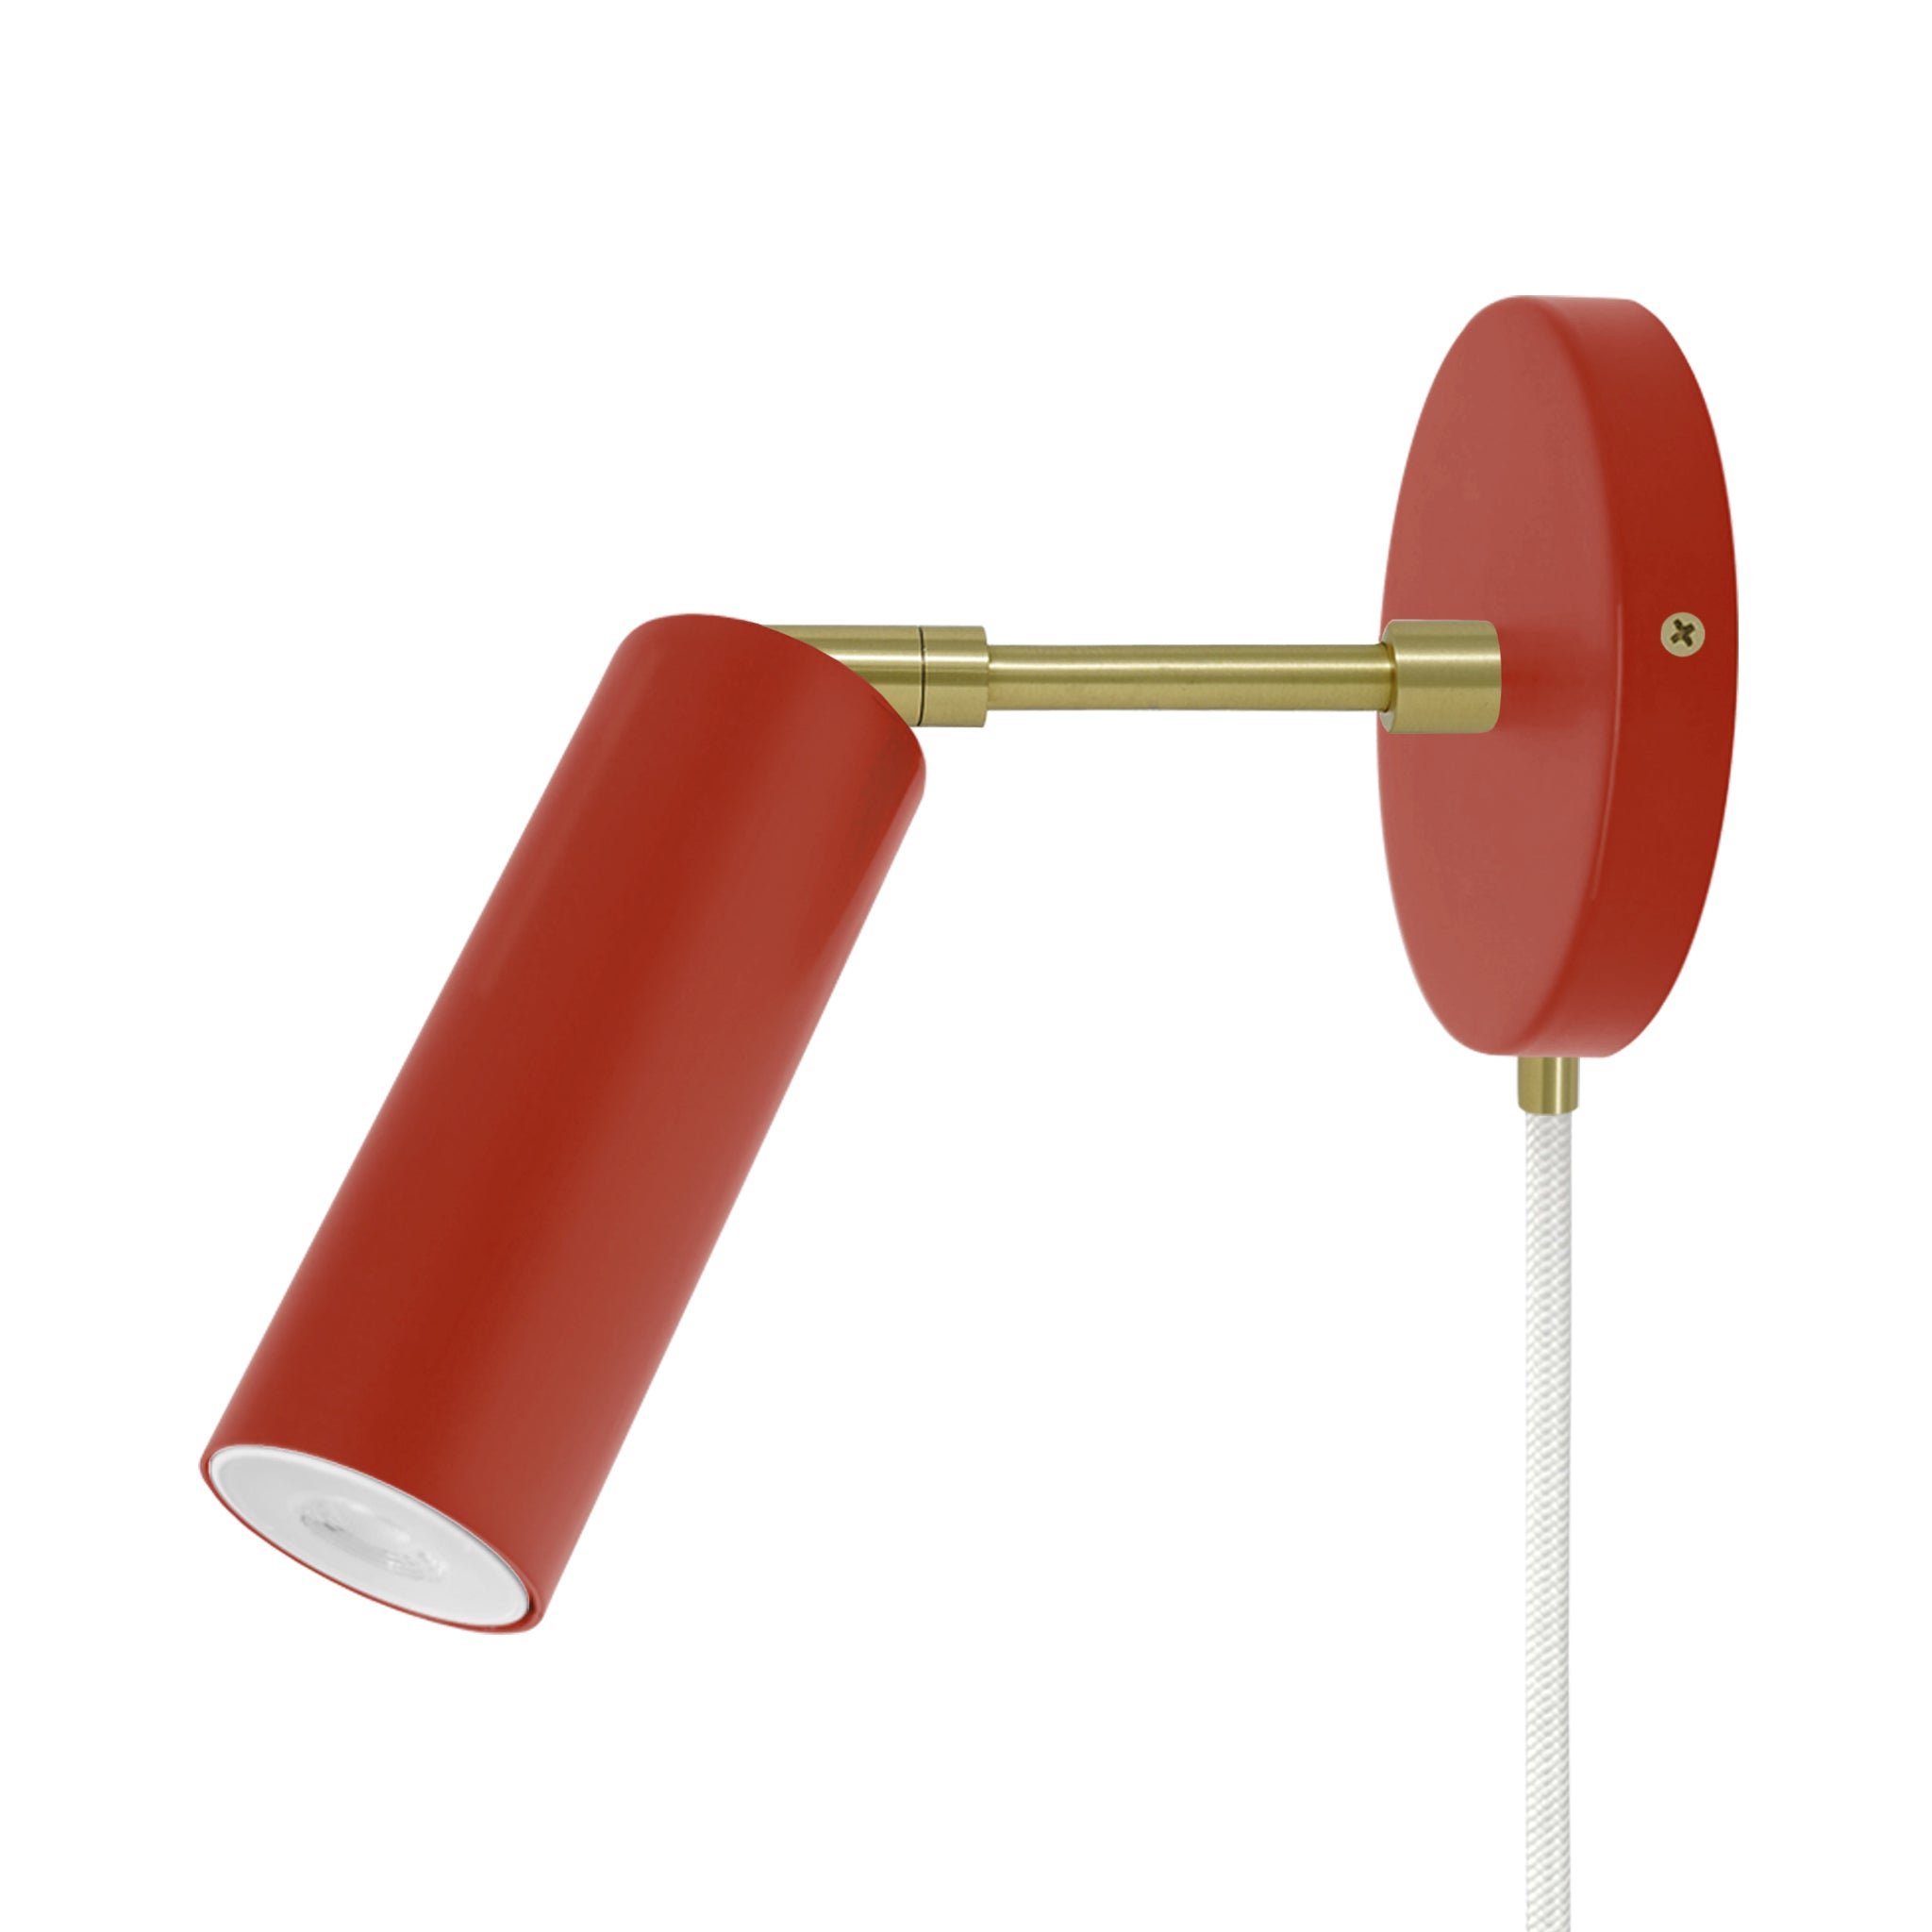 Brass and riding hood red color Reader plug-in sconce 3" arm Dutton Brown lighting